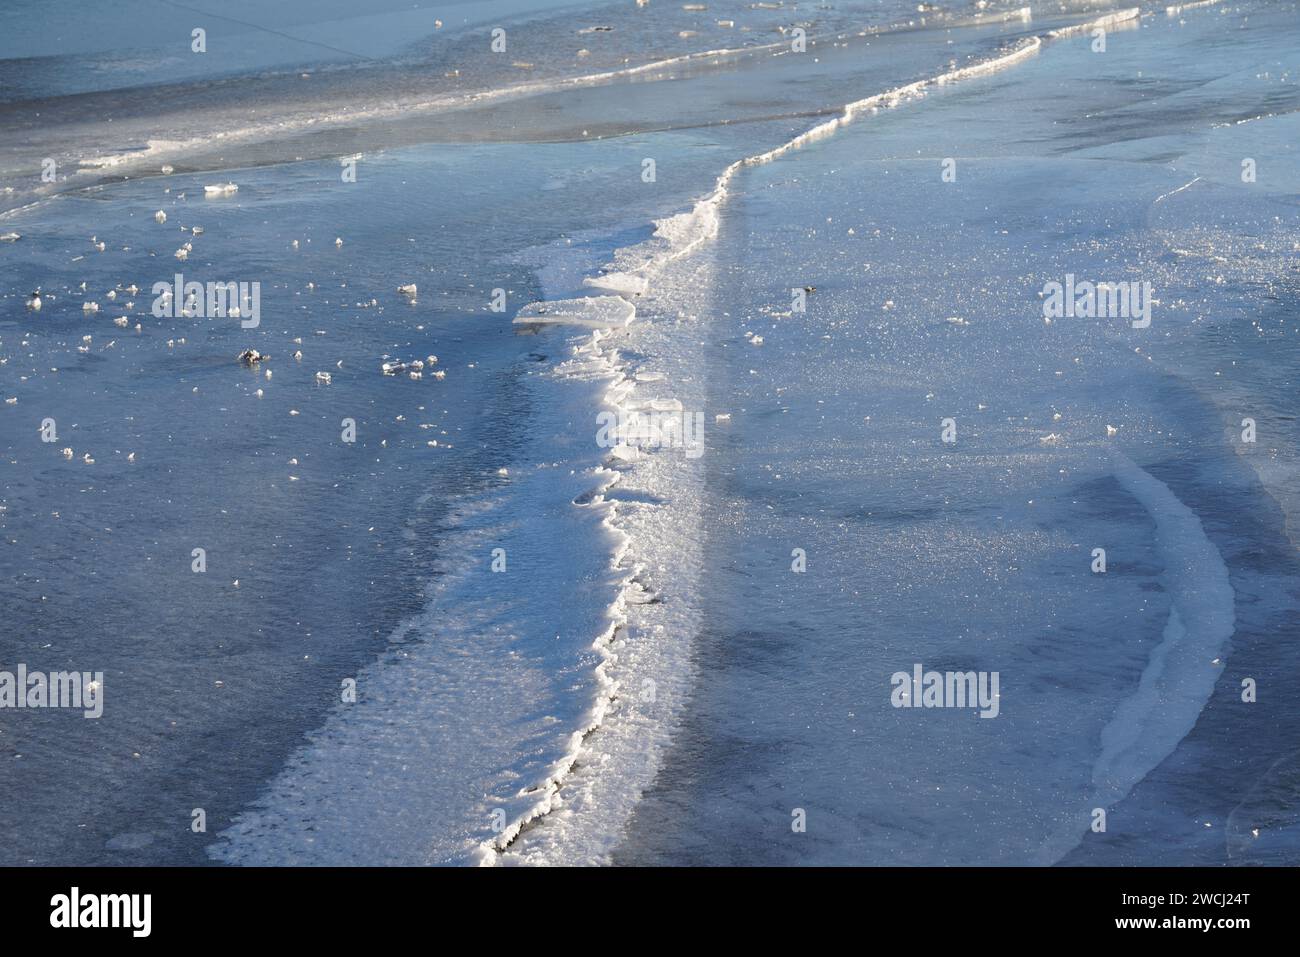 Winter landscape at an icy lake. Stock Photo